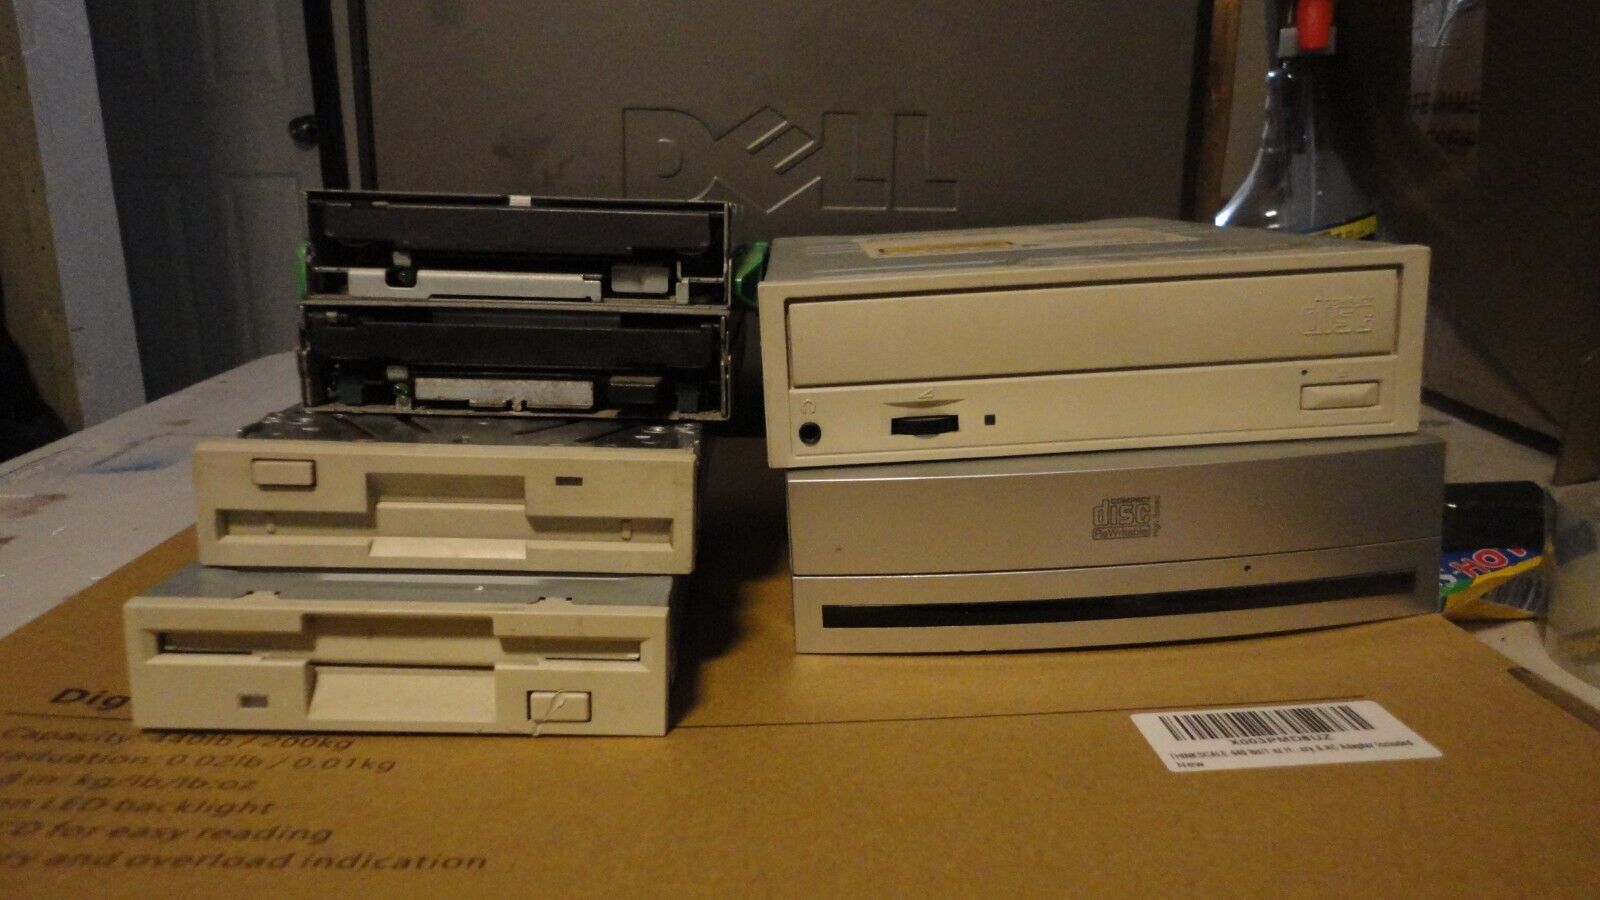 Lot of (4) floppy drives and (2) cd rom drives. 